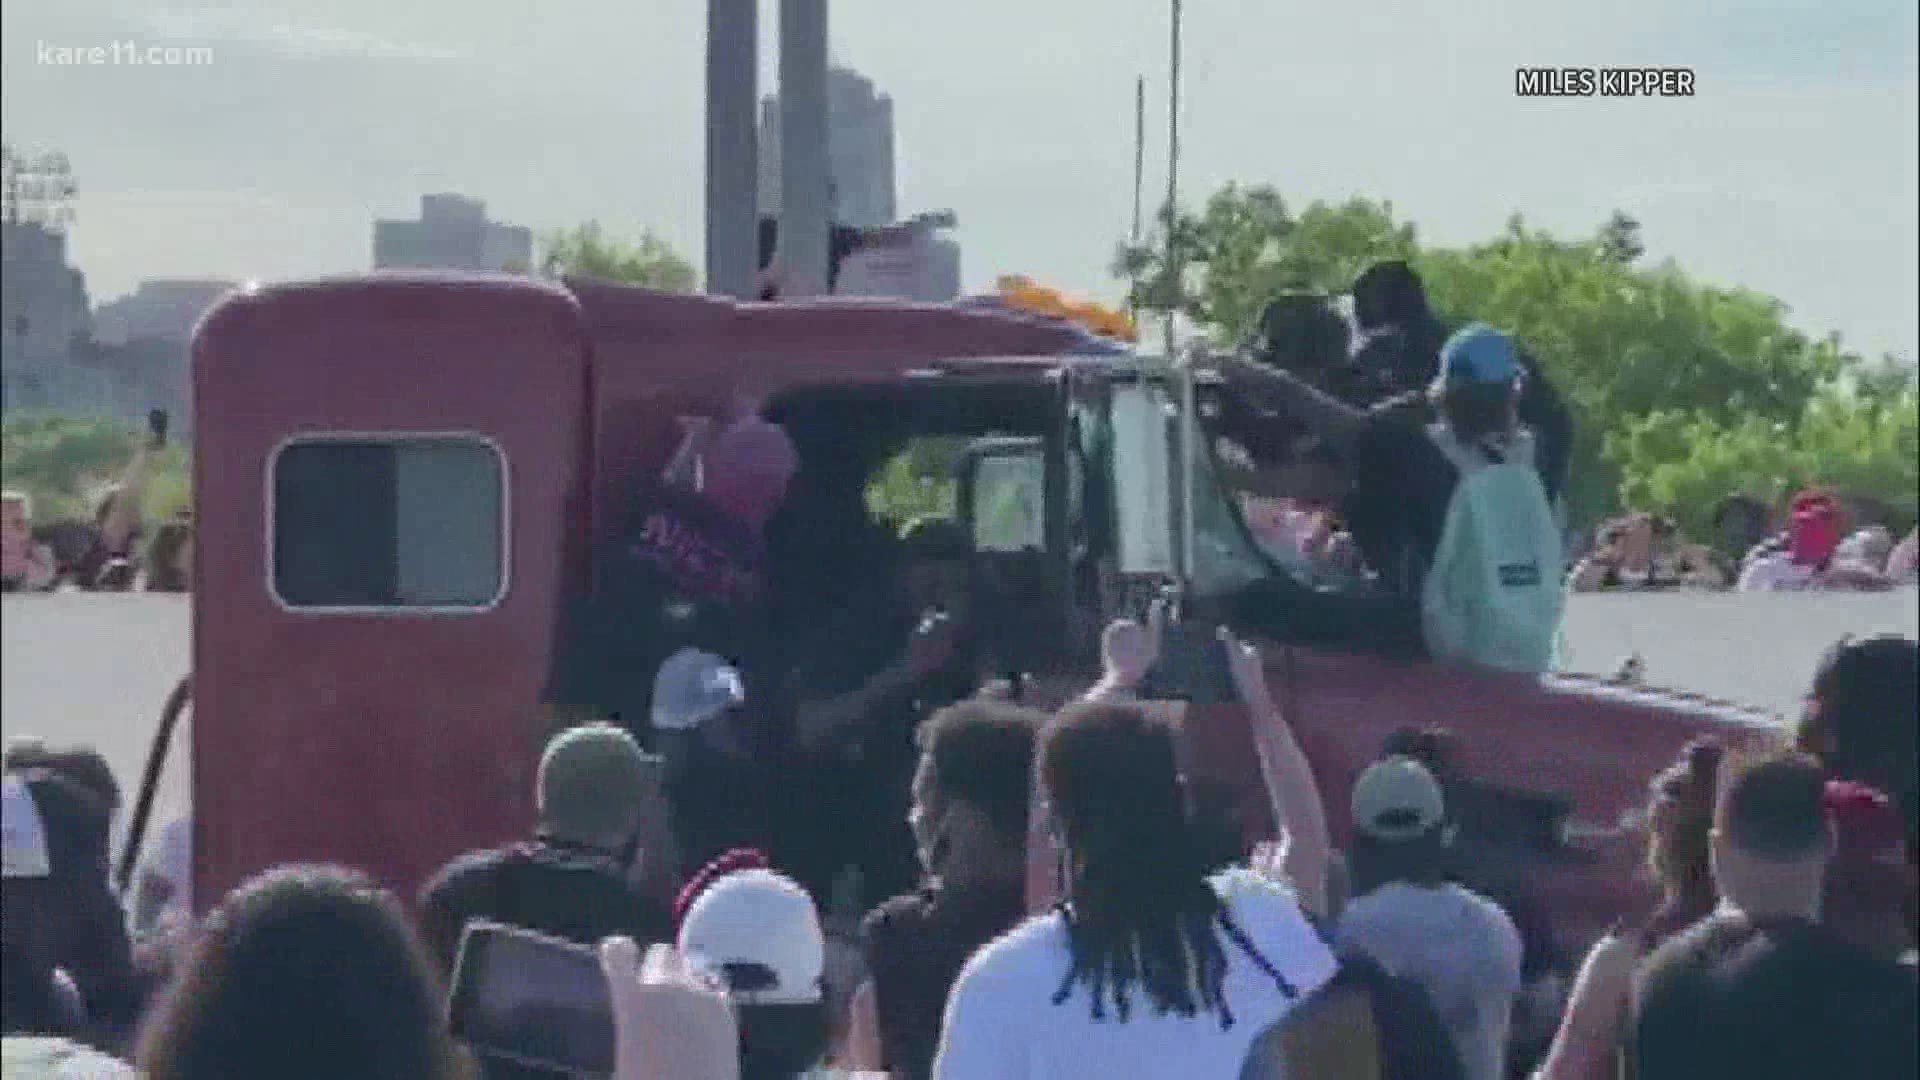 Randy Shaver interviewed a man who was on the I-35W bridge as a semi drove through a crowd.